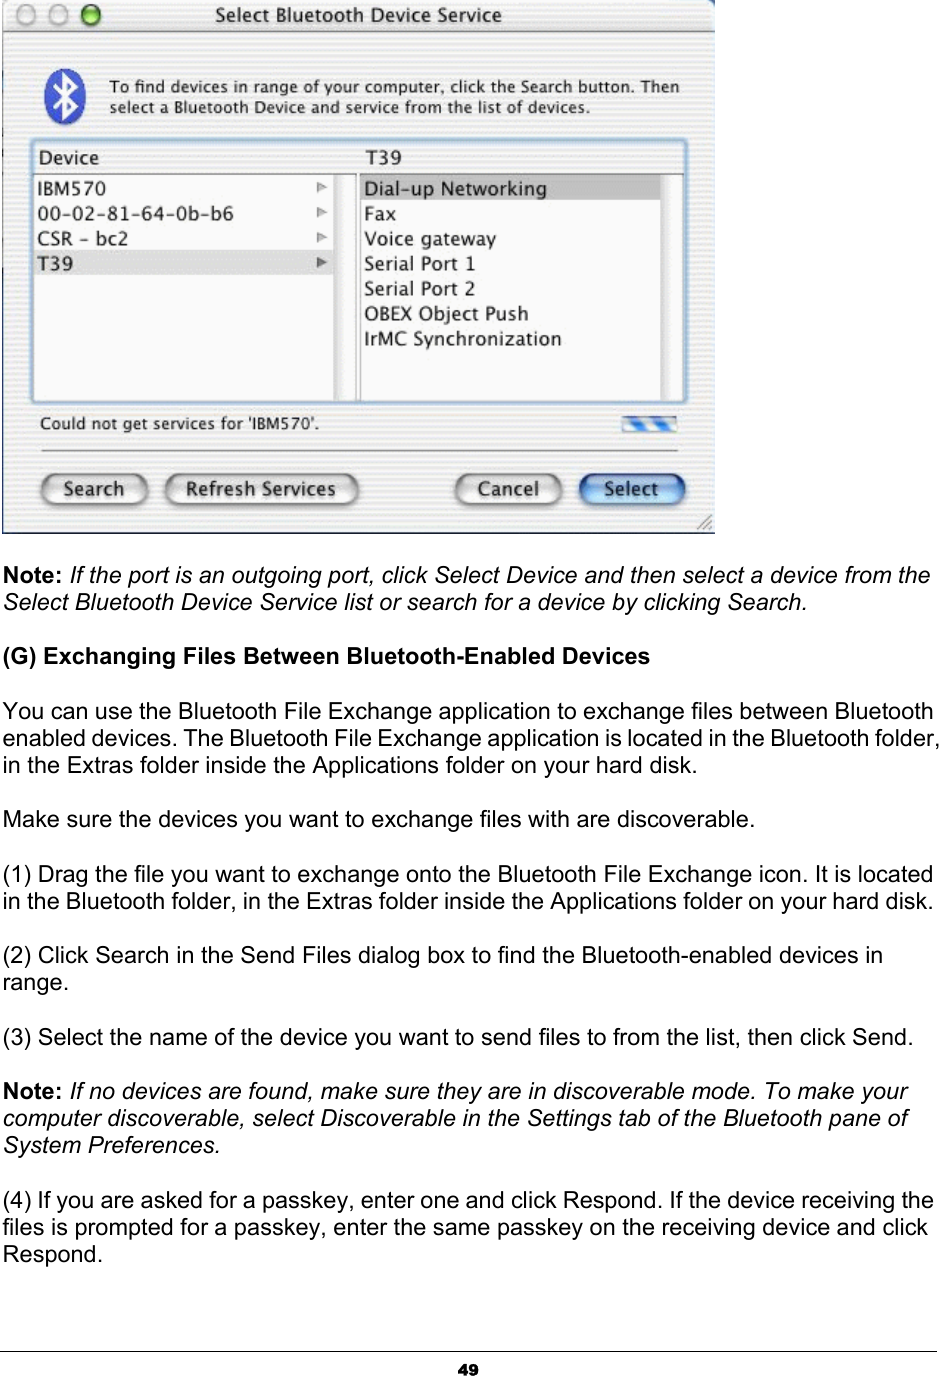  49 Note: If the port is an outgoing port, click Select Device and then select a device from the Select Bluetooth Device Service list or search for a device by clicking Search.   (G) Exchanging Files Between Bluetooth-Enabled Devices   You can use the Bluetooth File Exchange application to exchange files between Bluetooth enabled devices. The Bluetooth File Exchange application is located in the Bluetooth folder, in the Extras folder inside the Applications folder on your hard disk.   Make sure the devices you want to exchange files with are discoverable.   (1) Drag the file you want to exchange onto the Bluetooth File Exchange icon. It is located in the Bluetooth folder, in the Extras folder inside the Applications folder on your hard disk.   (2) Click Search in the Send Files dialog box to find the Bluetooth-enabled devices in range.  (3) Select the name of the device you want to send files to from the list, then click Send.   Note: If no devices are found, make sure they are in discoverable mode. To make your computer discoverable, select Discoverable in the Settings tab of the Bluetooth pane of System Preferences.   (4) If you are asked for a passkey, enter one and click Respond. If the device receiving the files is prompted for a passkey, enter the same passkey on the receiving device and click Respond.  